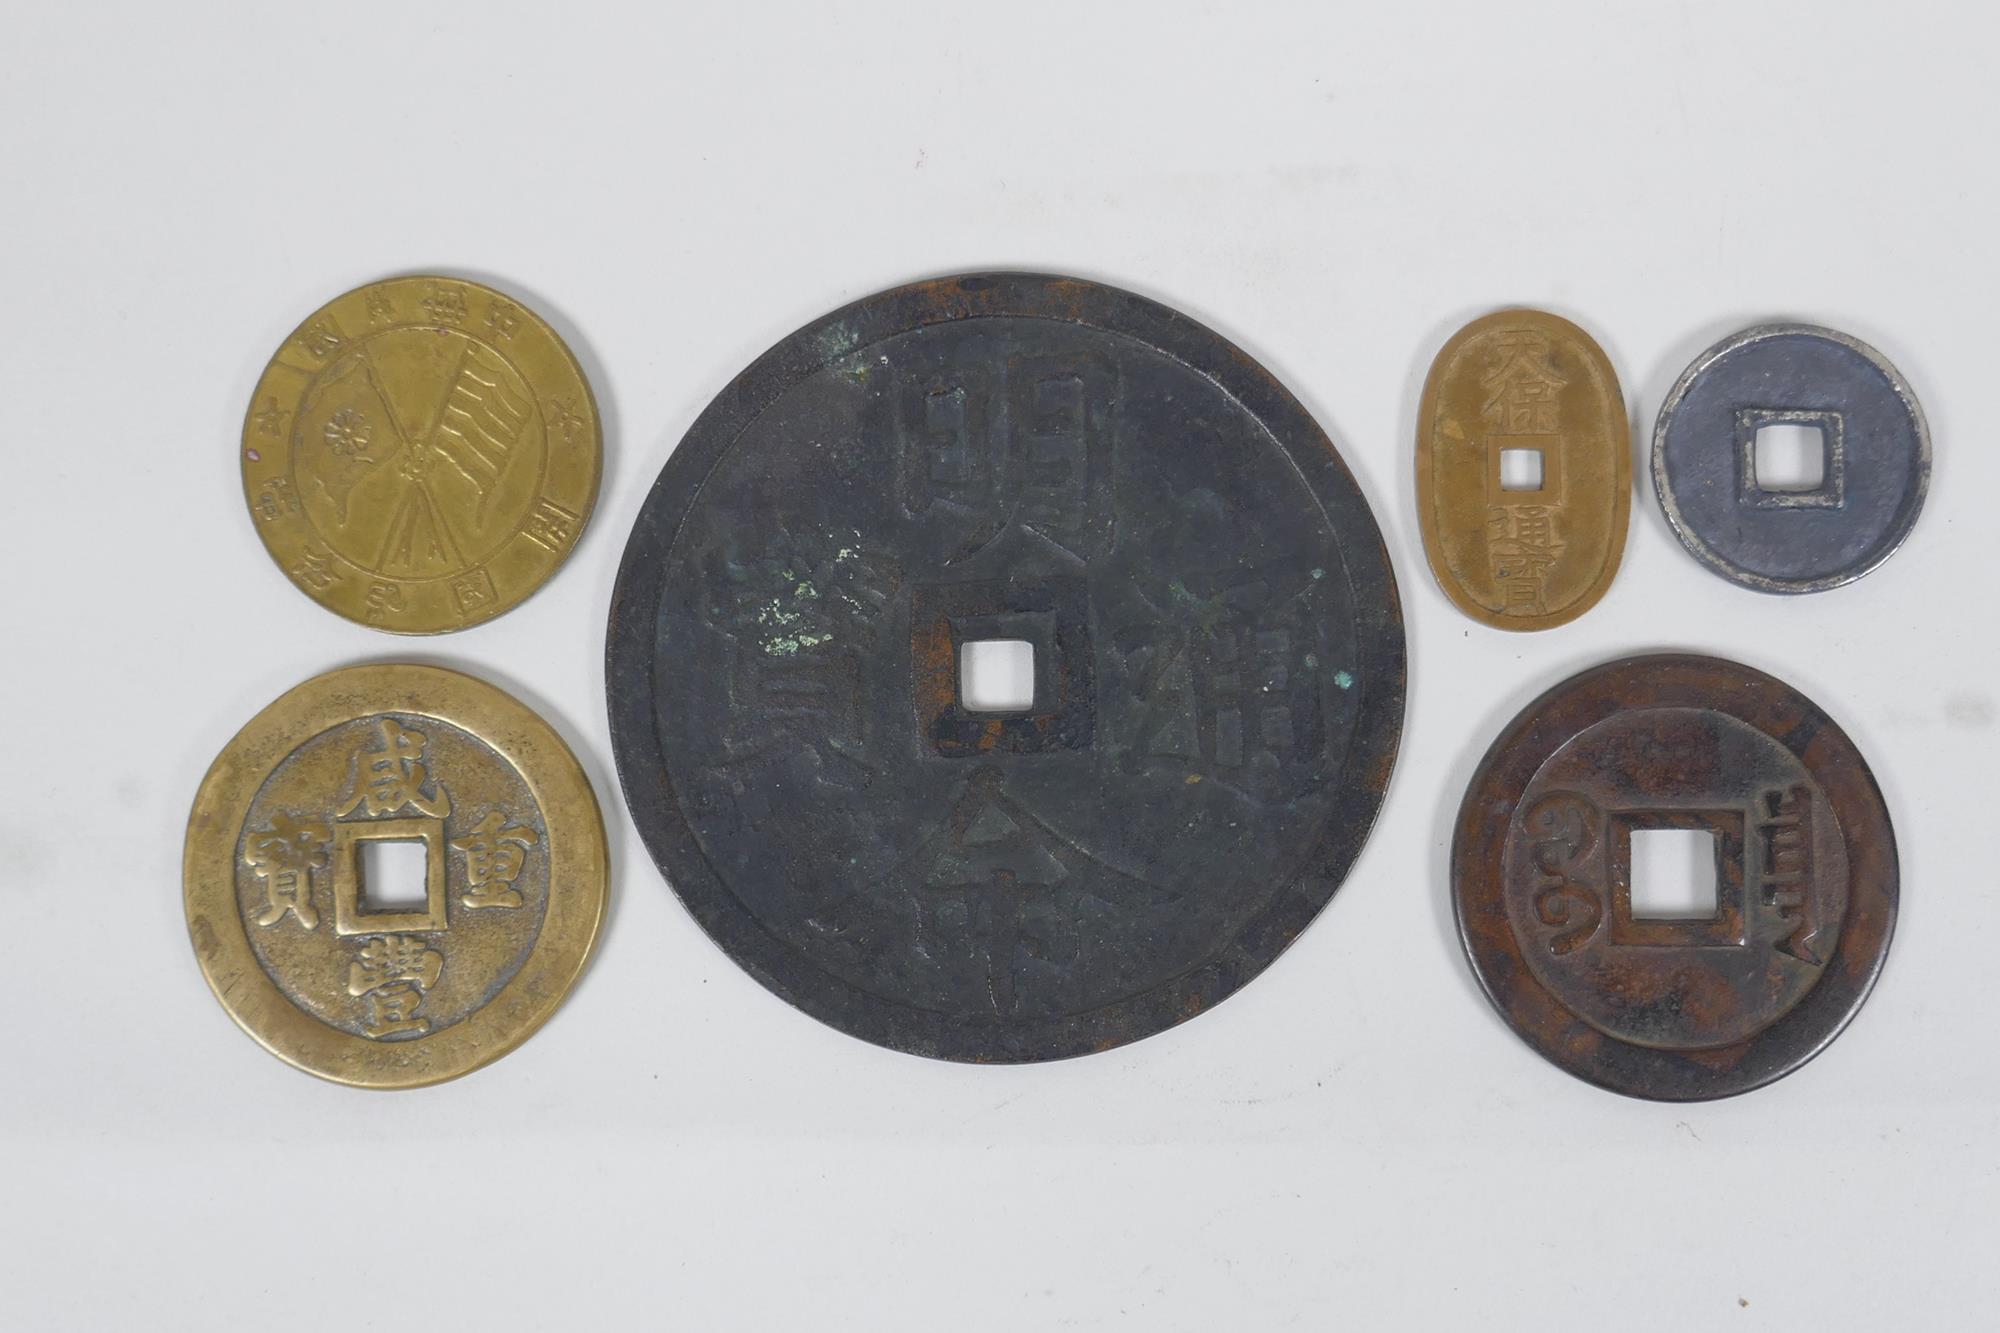 A large Chinese bronze pi-disc, and other smaller bronze pi-discs and tokens, largest 12cm diameter - Image 2 of 2